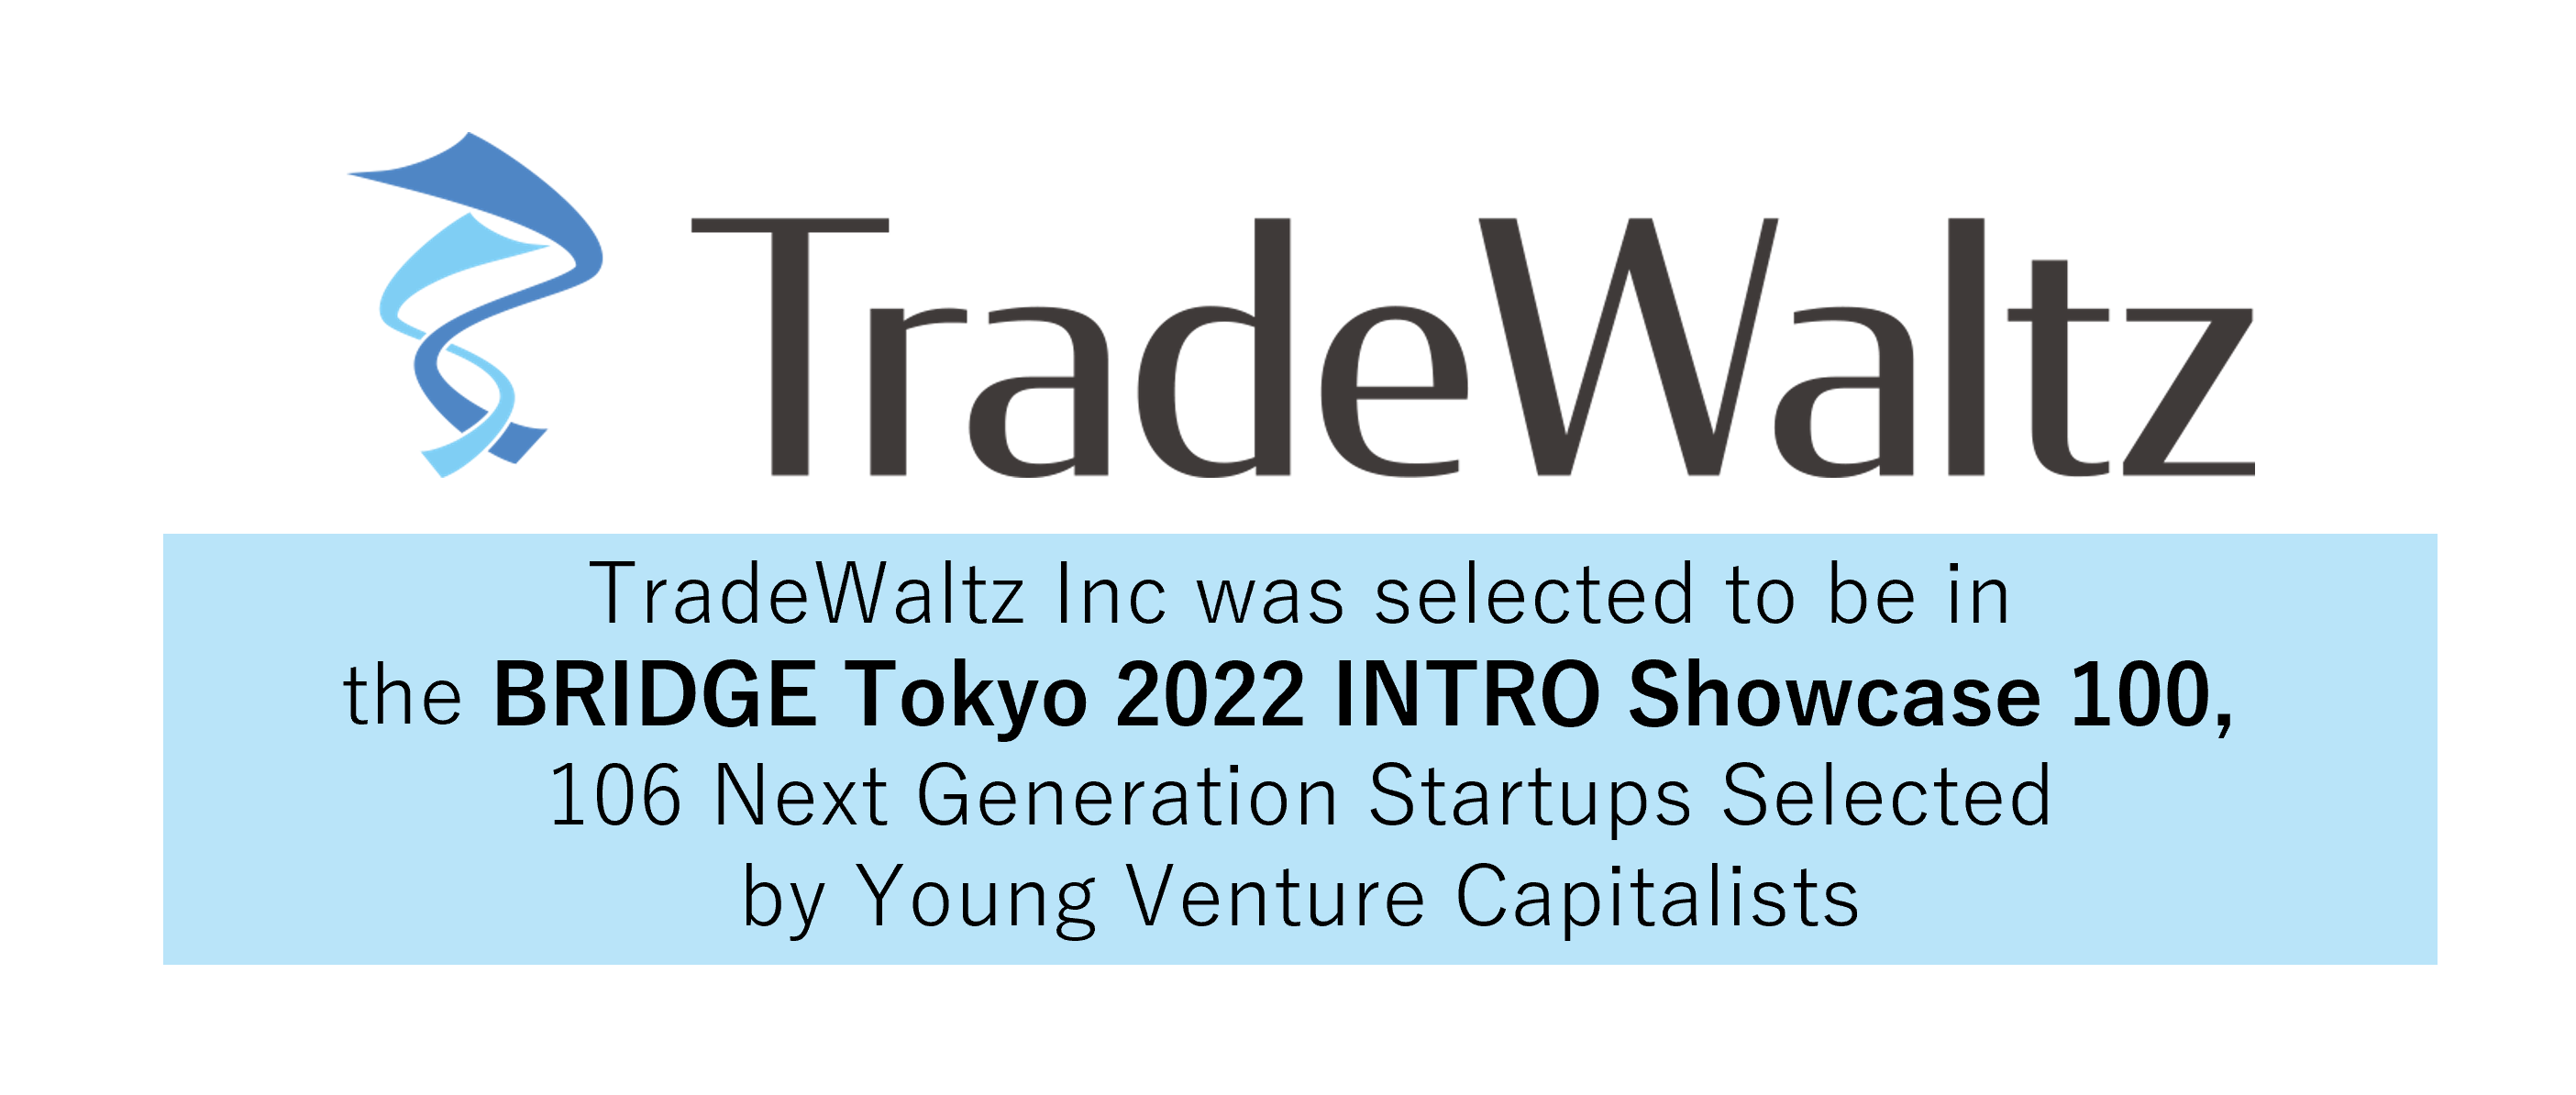 TradeWaltz Inc has Been Selected for the “BRIDGE Tokyo 2022 INTRO Showcase 100”, The Next Generation Startups Selected by Young Venture Capitalists